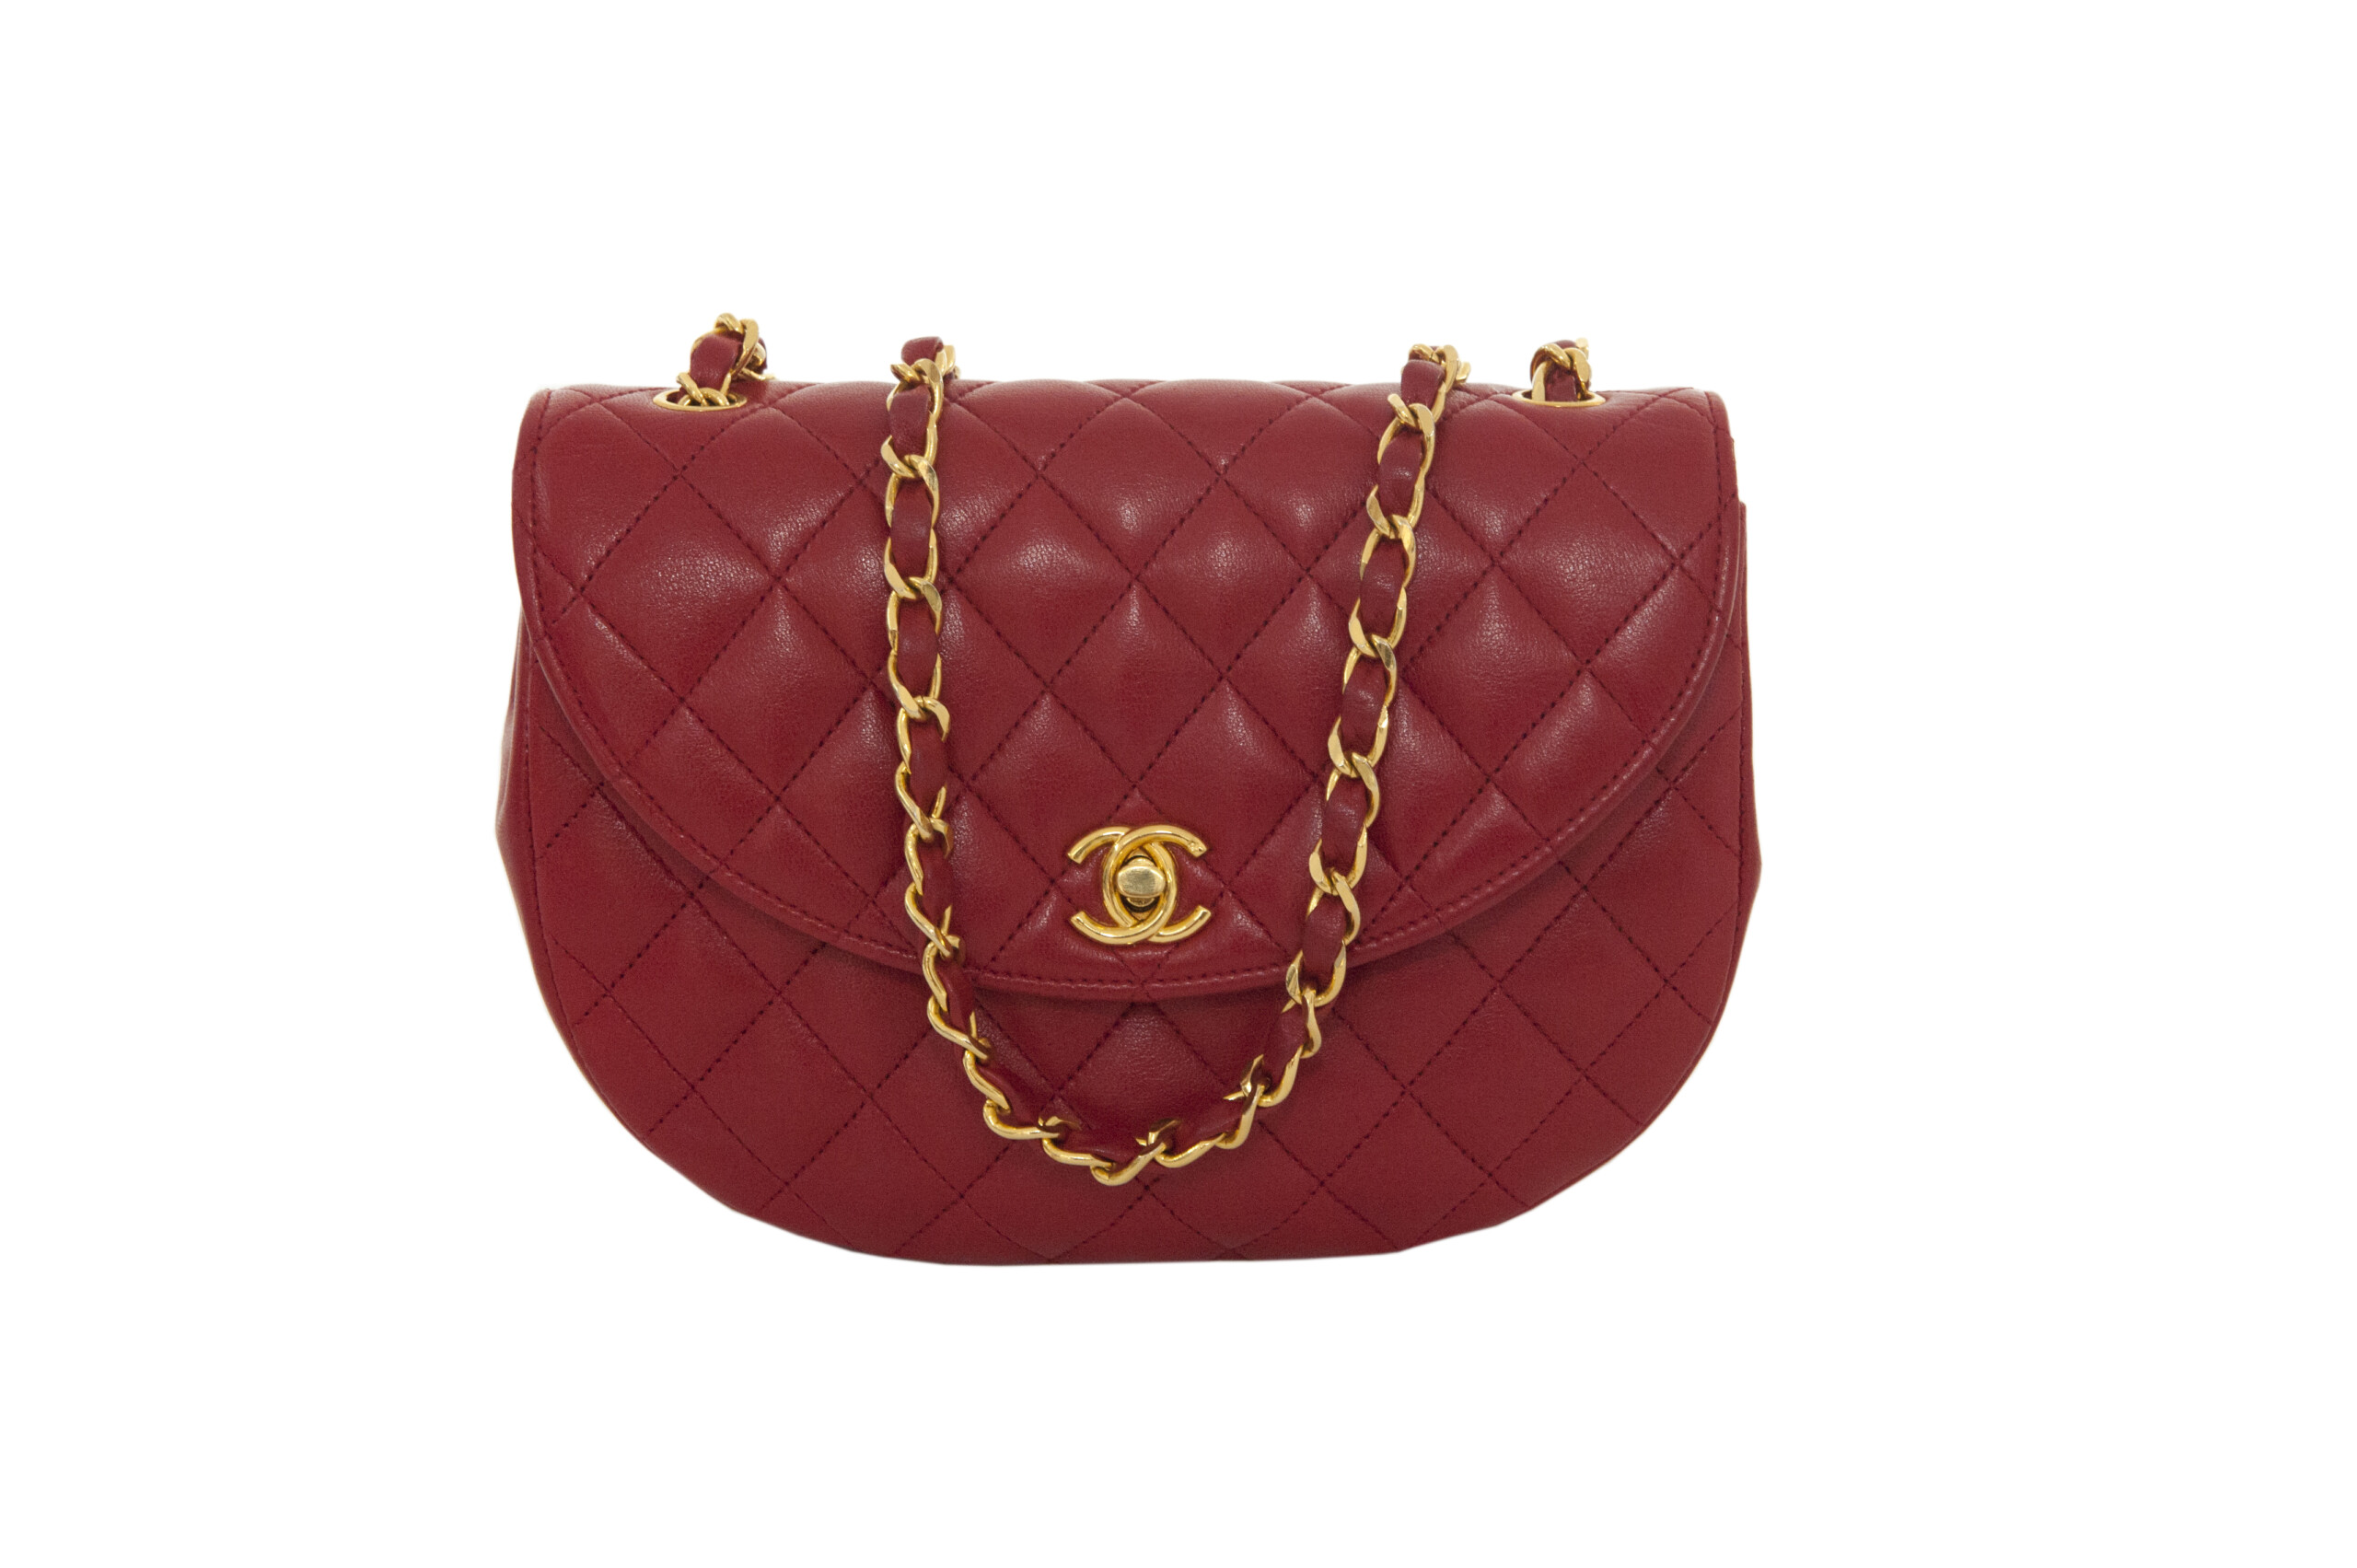 Chanel timeless red quilted leather